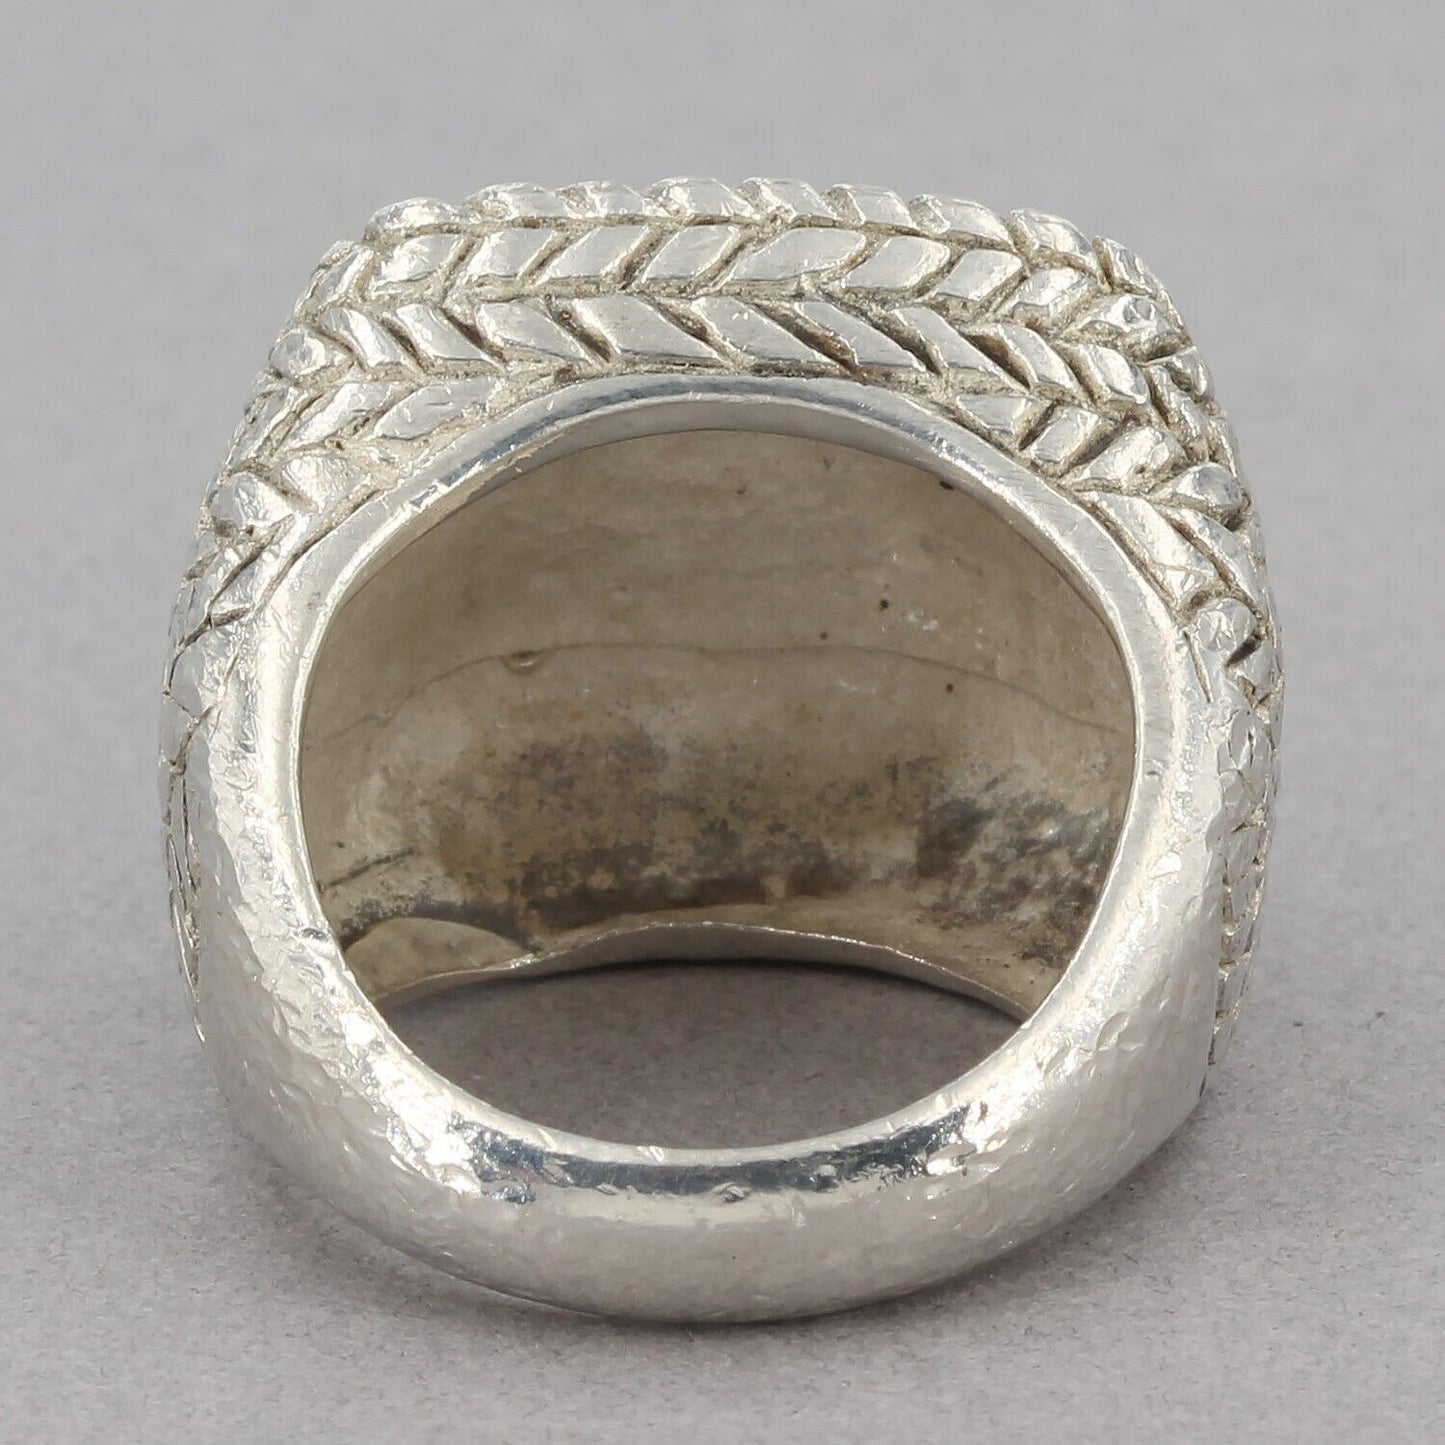 Retired Silpada Sterling Square Hammered Dome Ring Braid Design R1646 Size 5.25